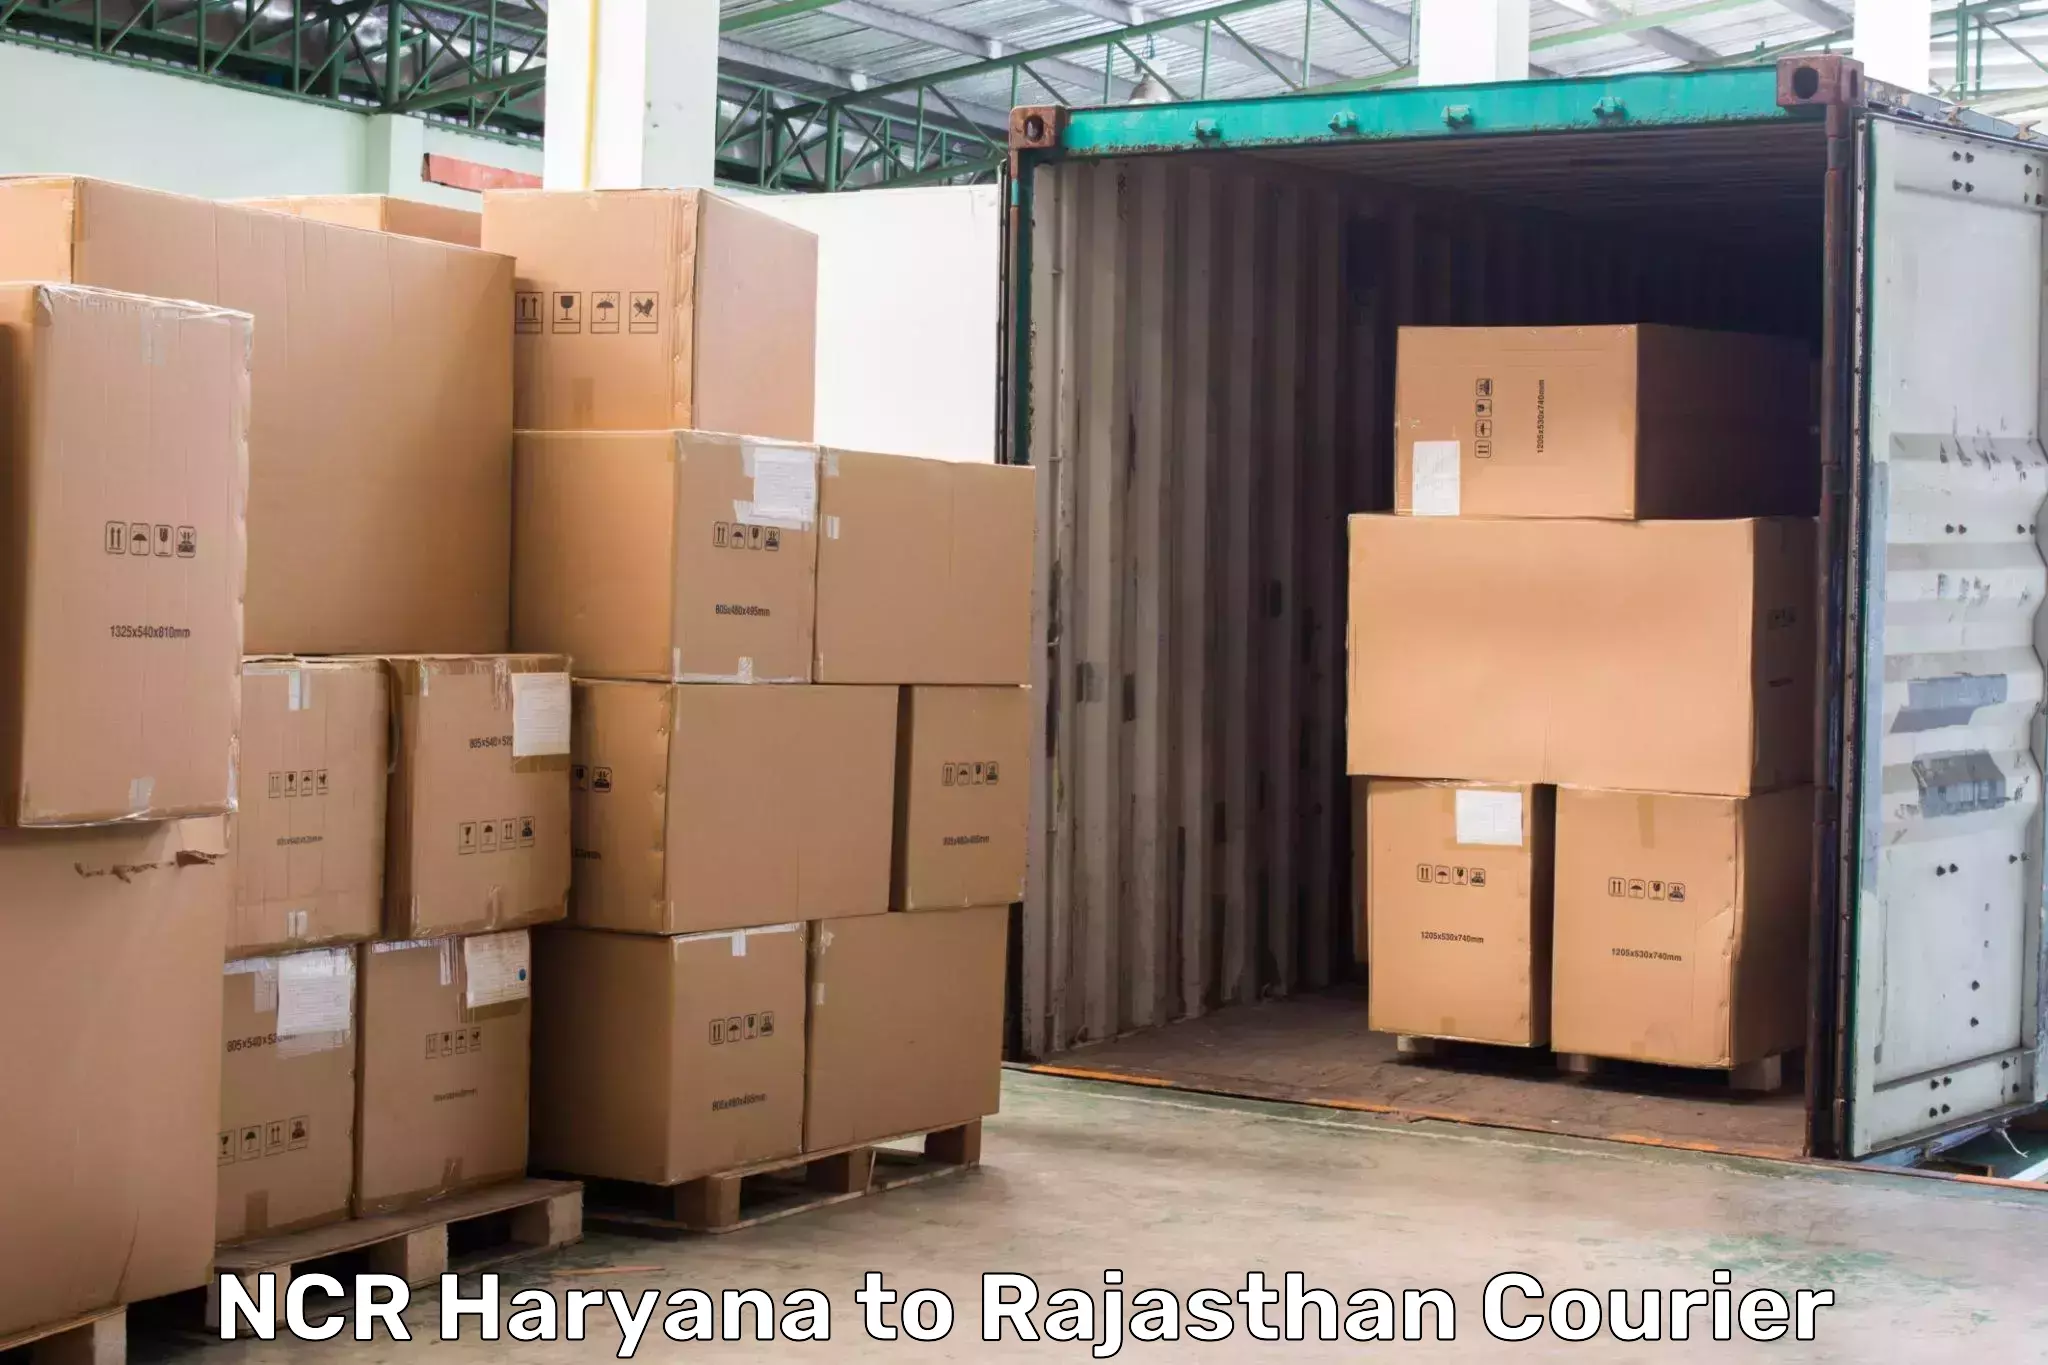 Local courier options NCR Haryana to Nohar